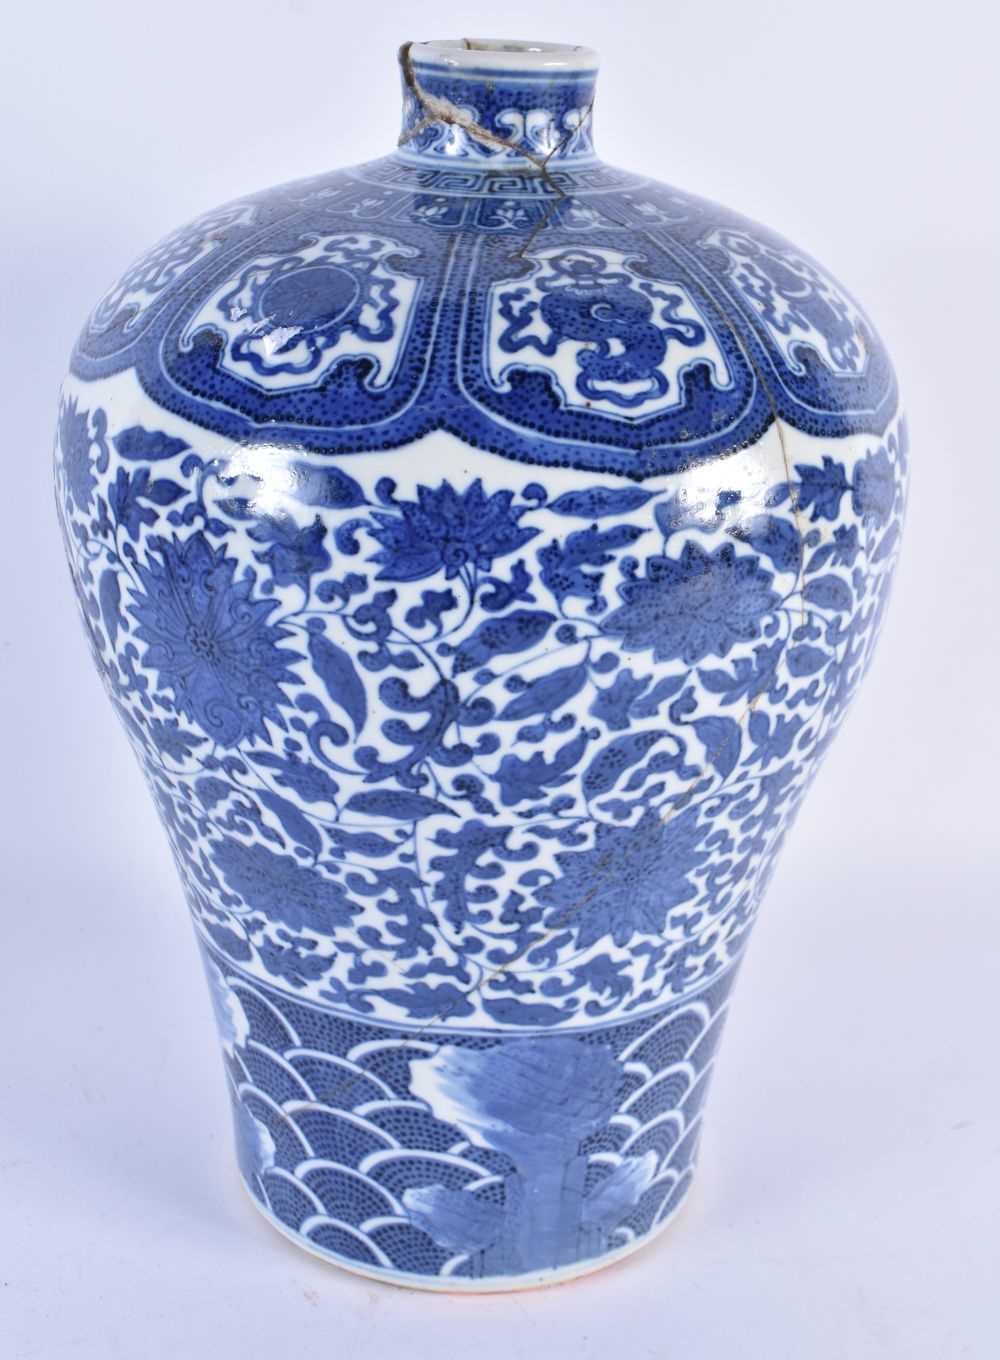 A LARGE 18TH CENTURY CHINESE BLUE AND WHITE PORCELAIN MEIPING VASE Qianlong mark and late in the - Image 3 of 6